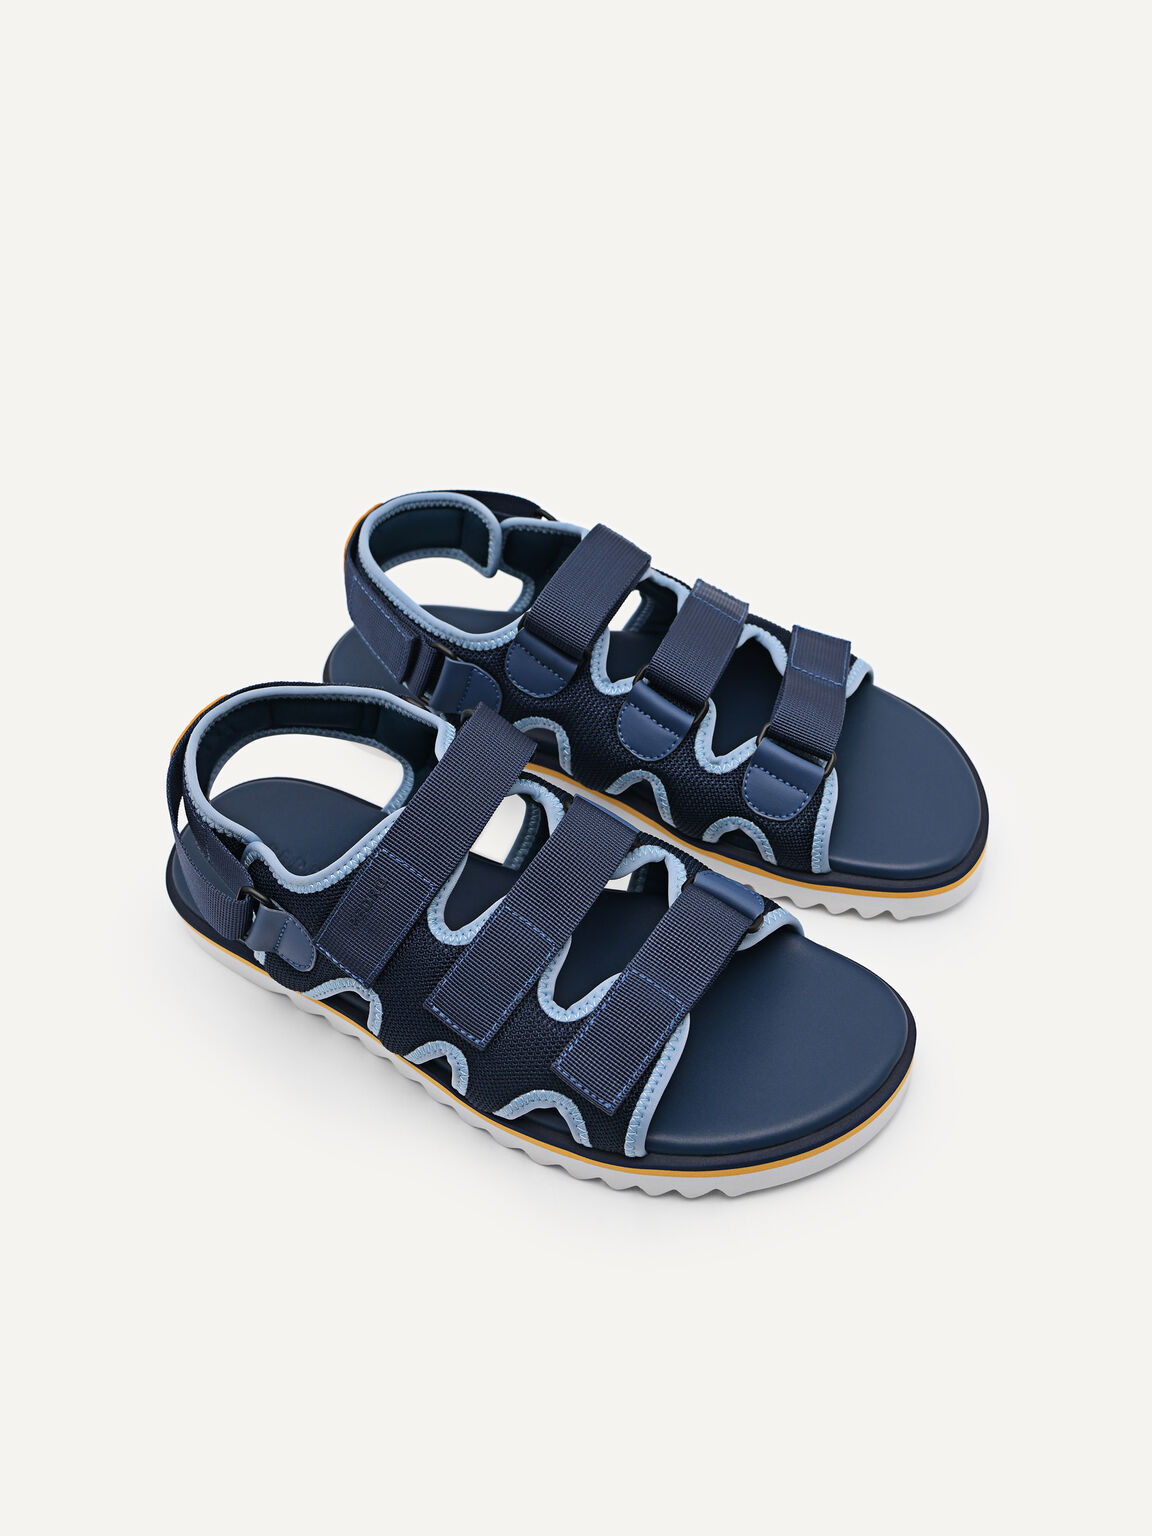 Contrasting Technical Sandals, Navy